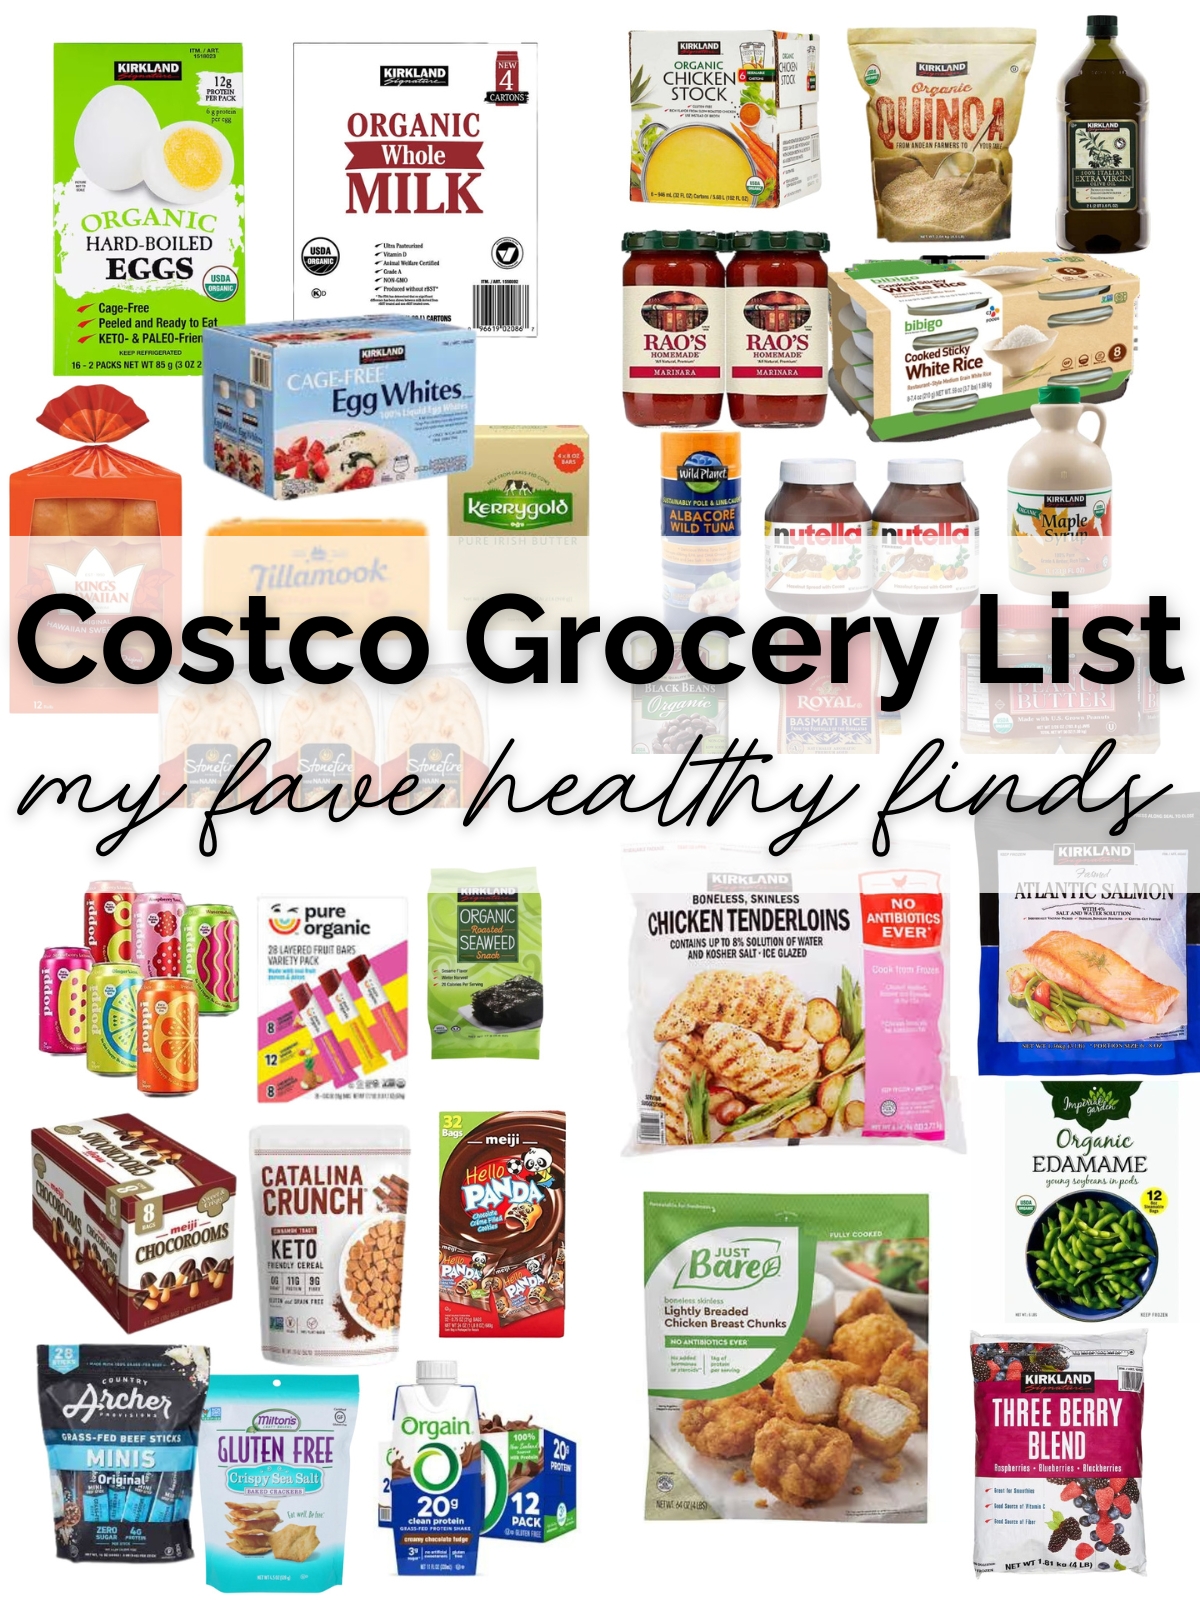 Costco Grocery List (my fave healthy foods at Costco) - Howe We Live